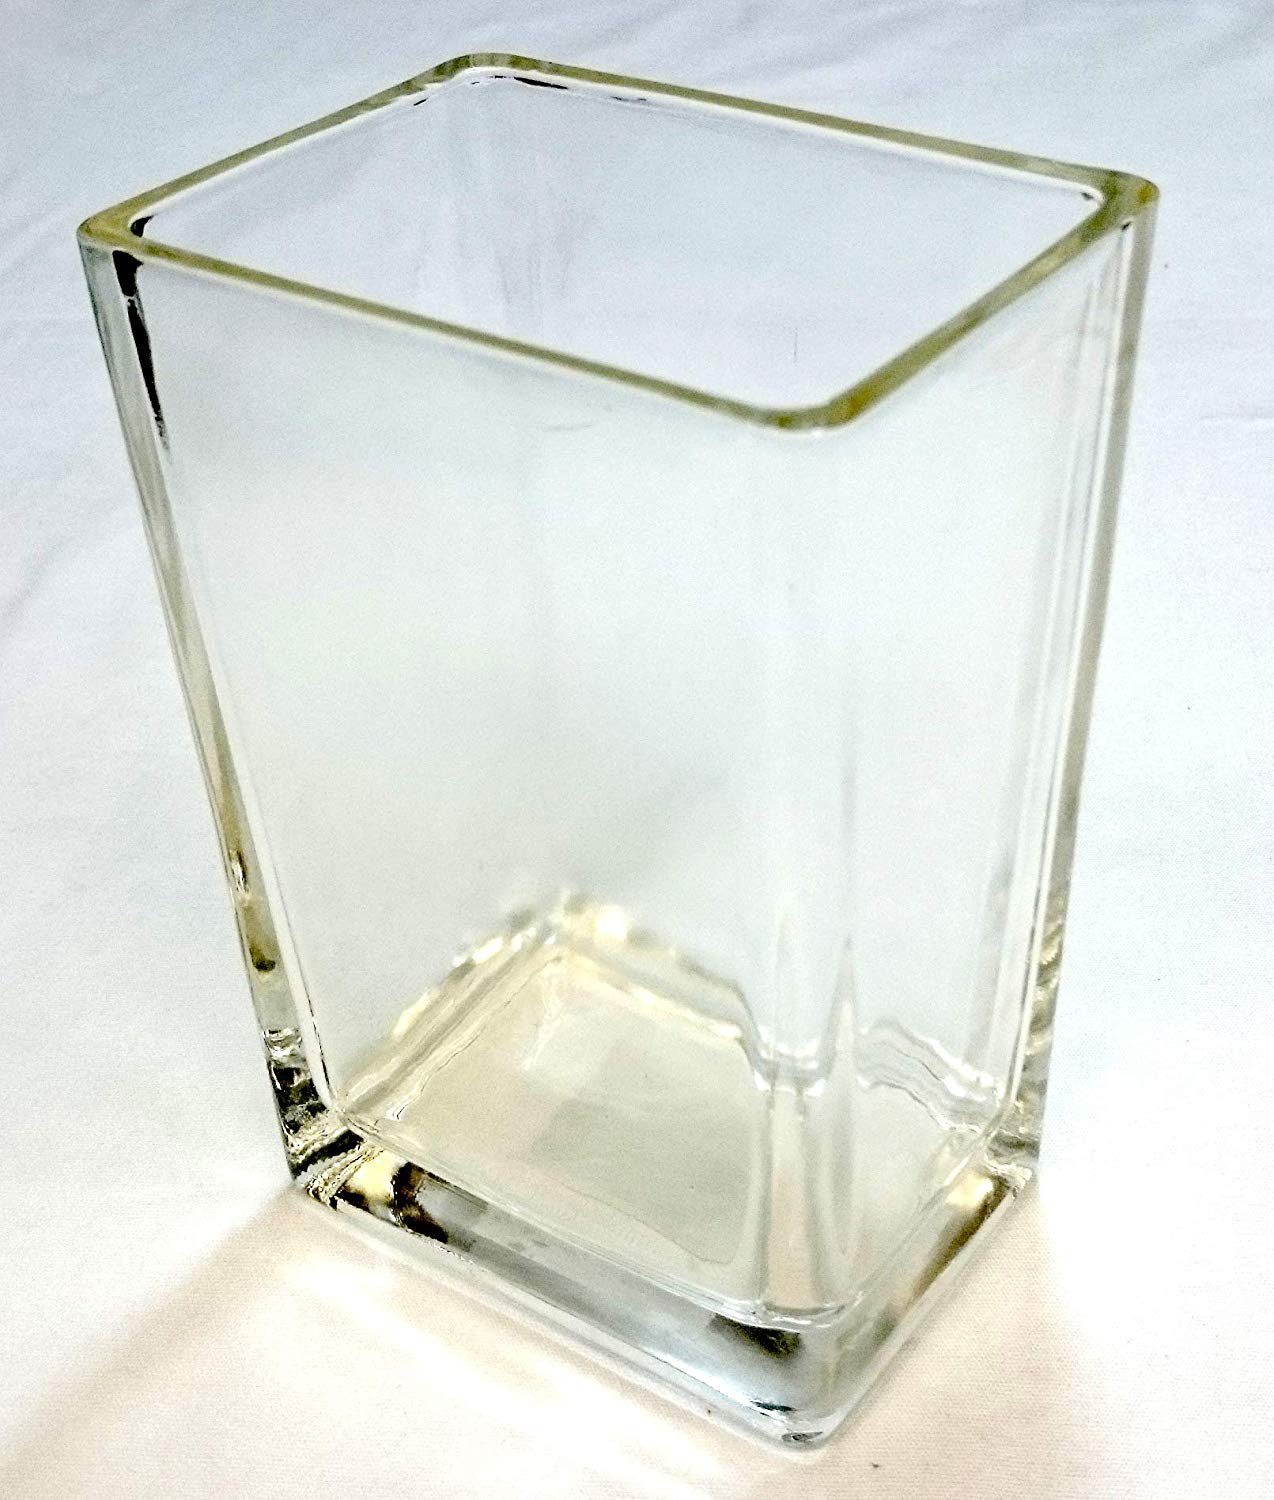 20 attractive Clear Glass Vase Square 2024 free download clear glass vase square of amazon com concord global trading 6 rectangle 3x4 base glass vase pertaining to amazon com concord global trading 6 rectangle 3x4 base glass vase six inch high tap